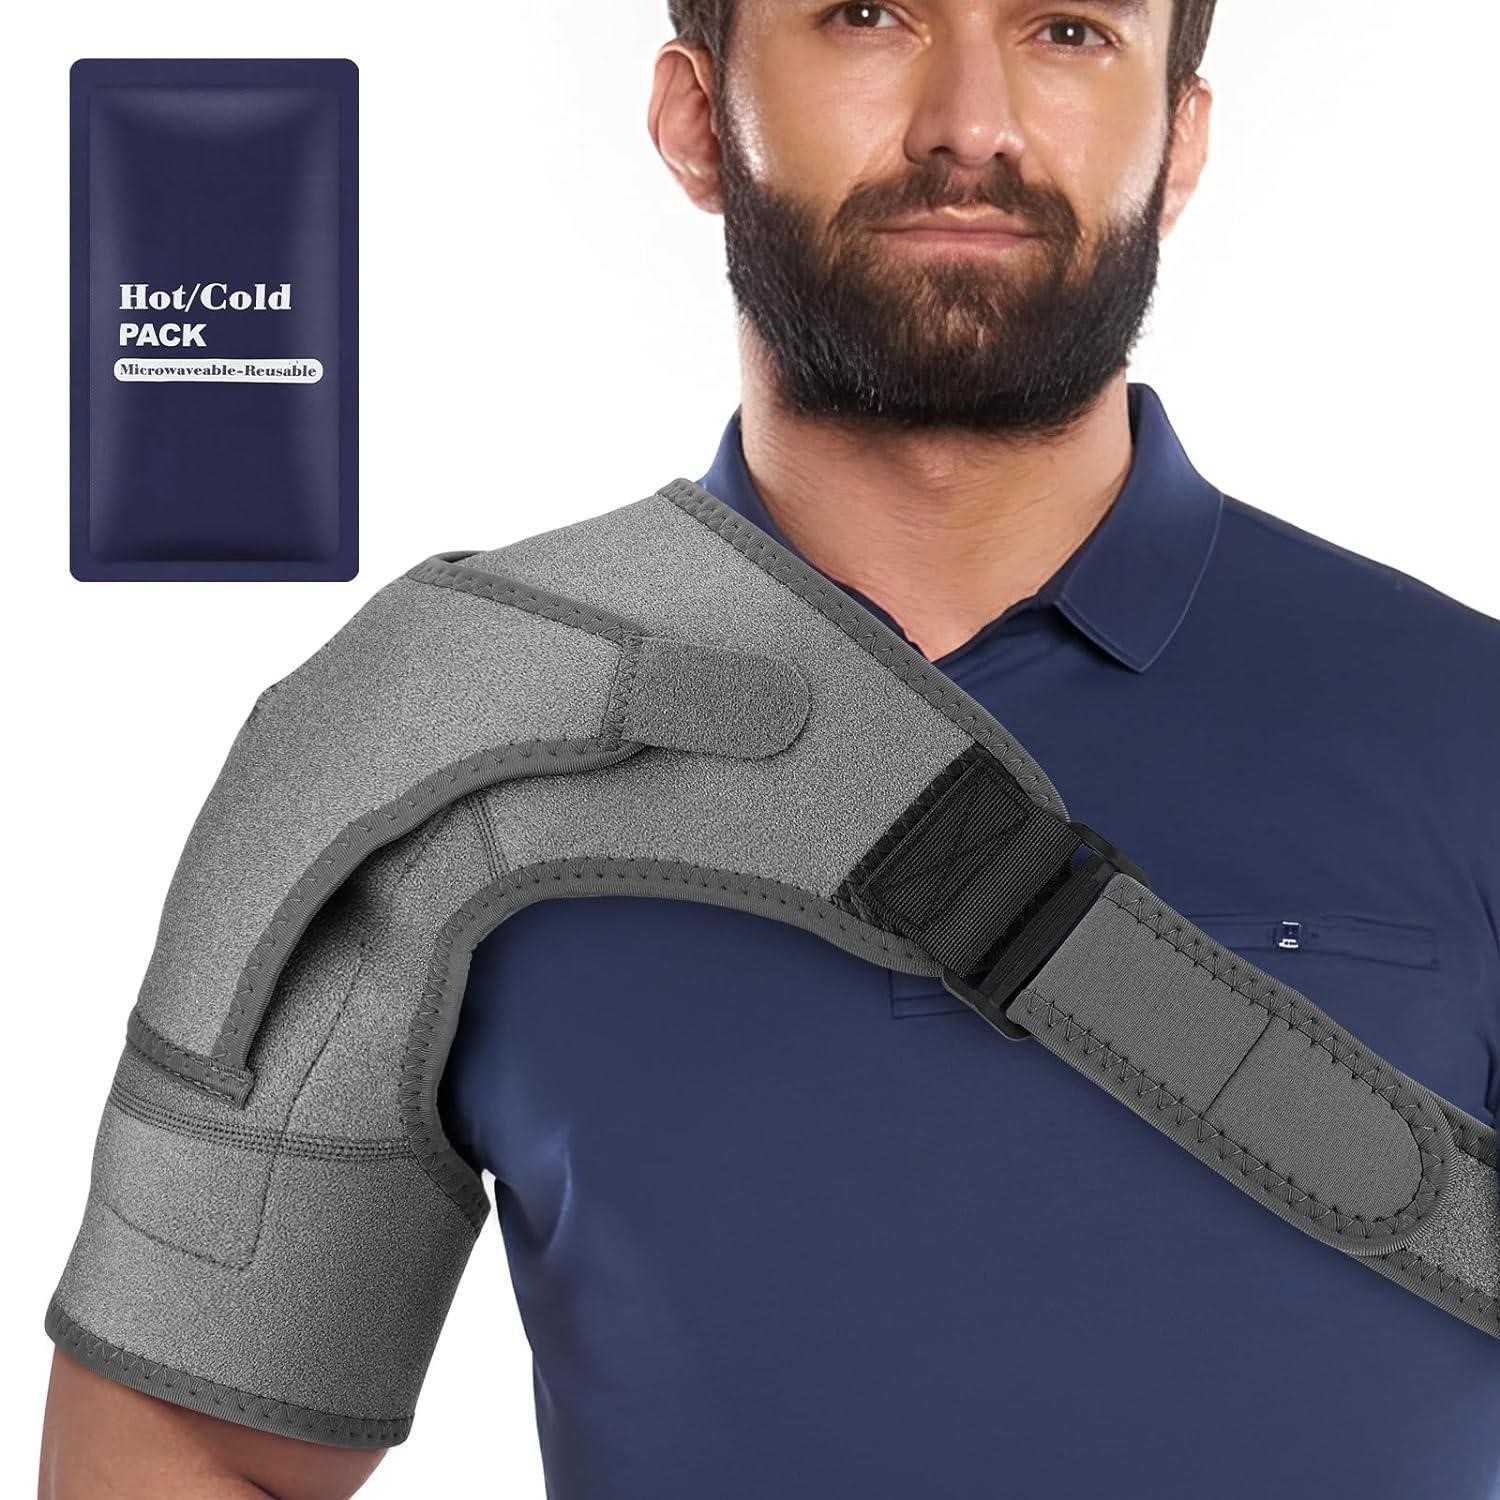 Shoulder Brace with Ice Pack